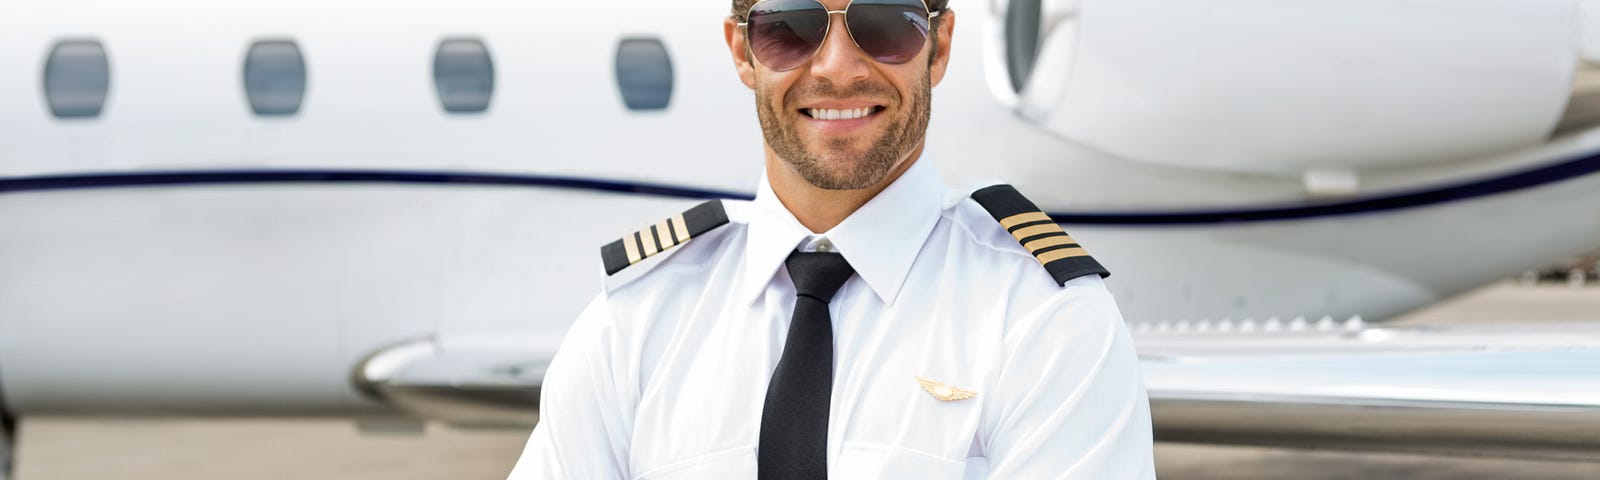 Sexy, male private jet captain. Depositphotos.